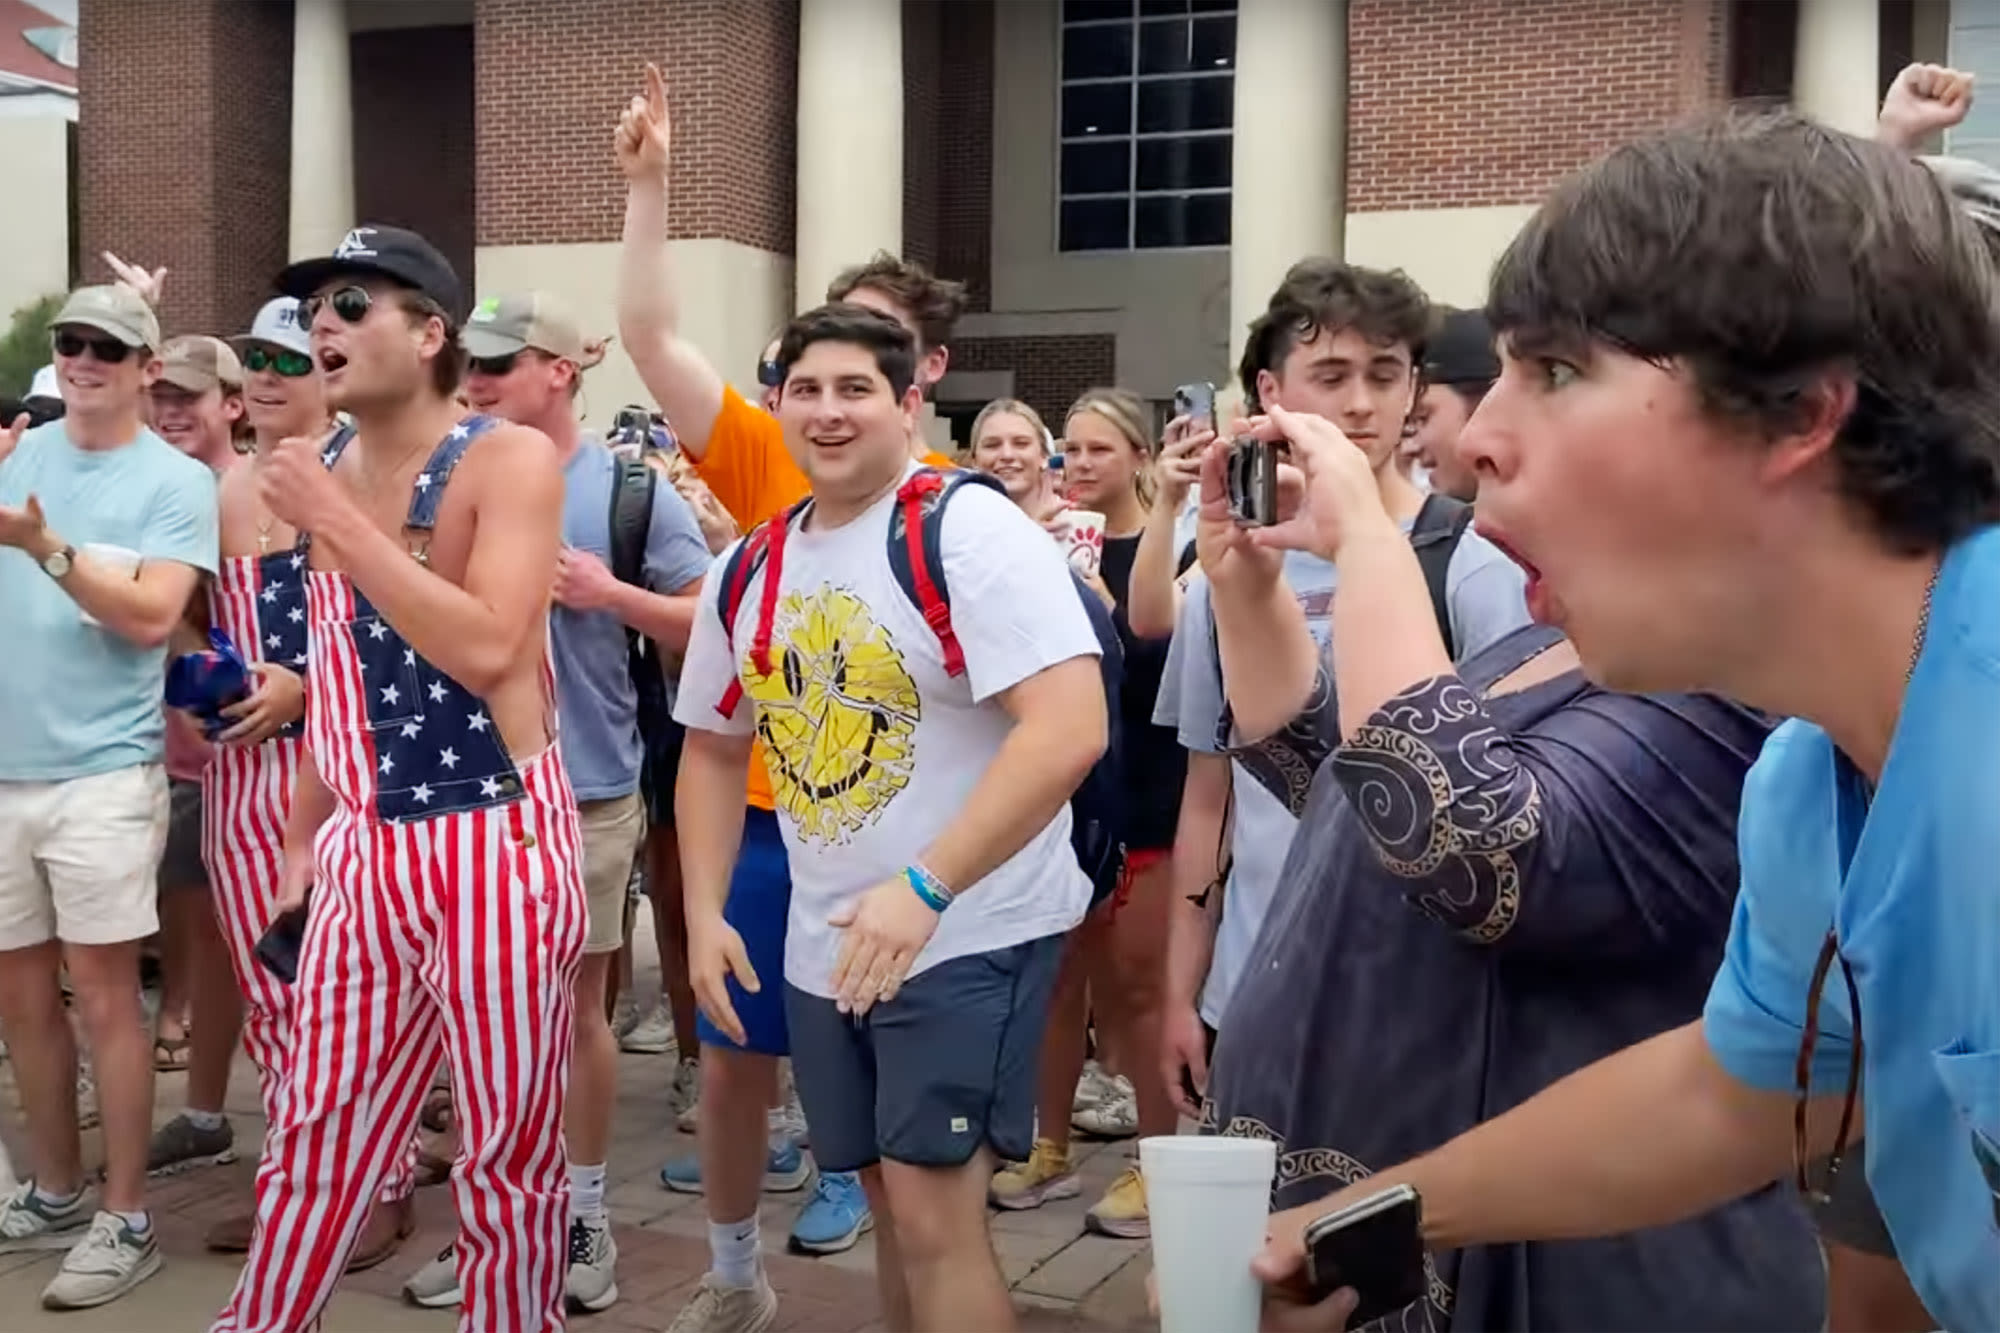 RNC Uses UM Protest Video, Clipping Out Racist Gesture